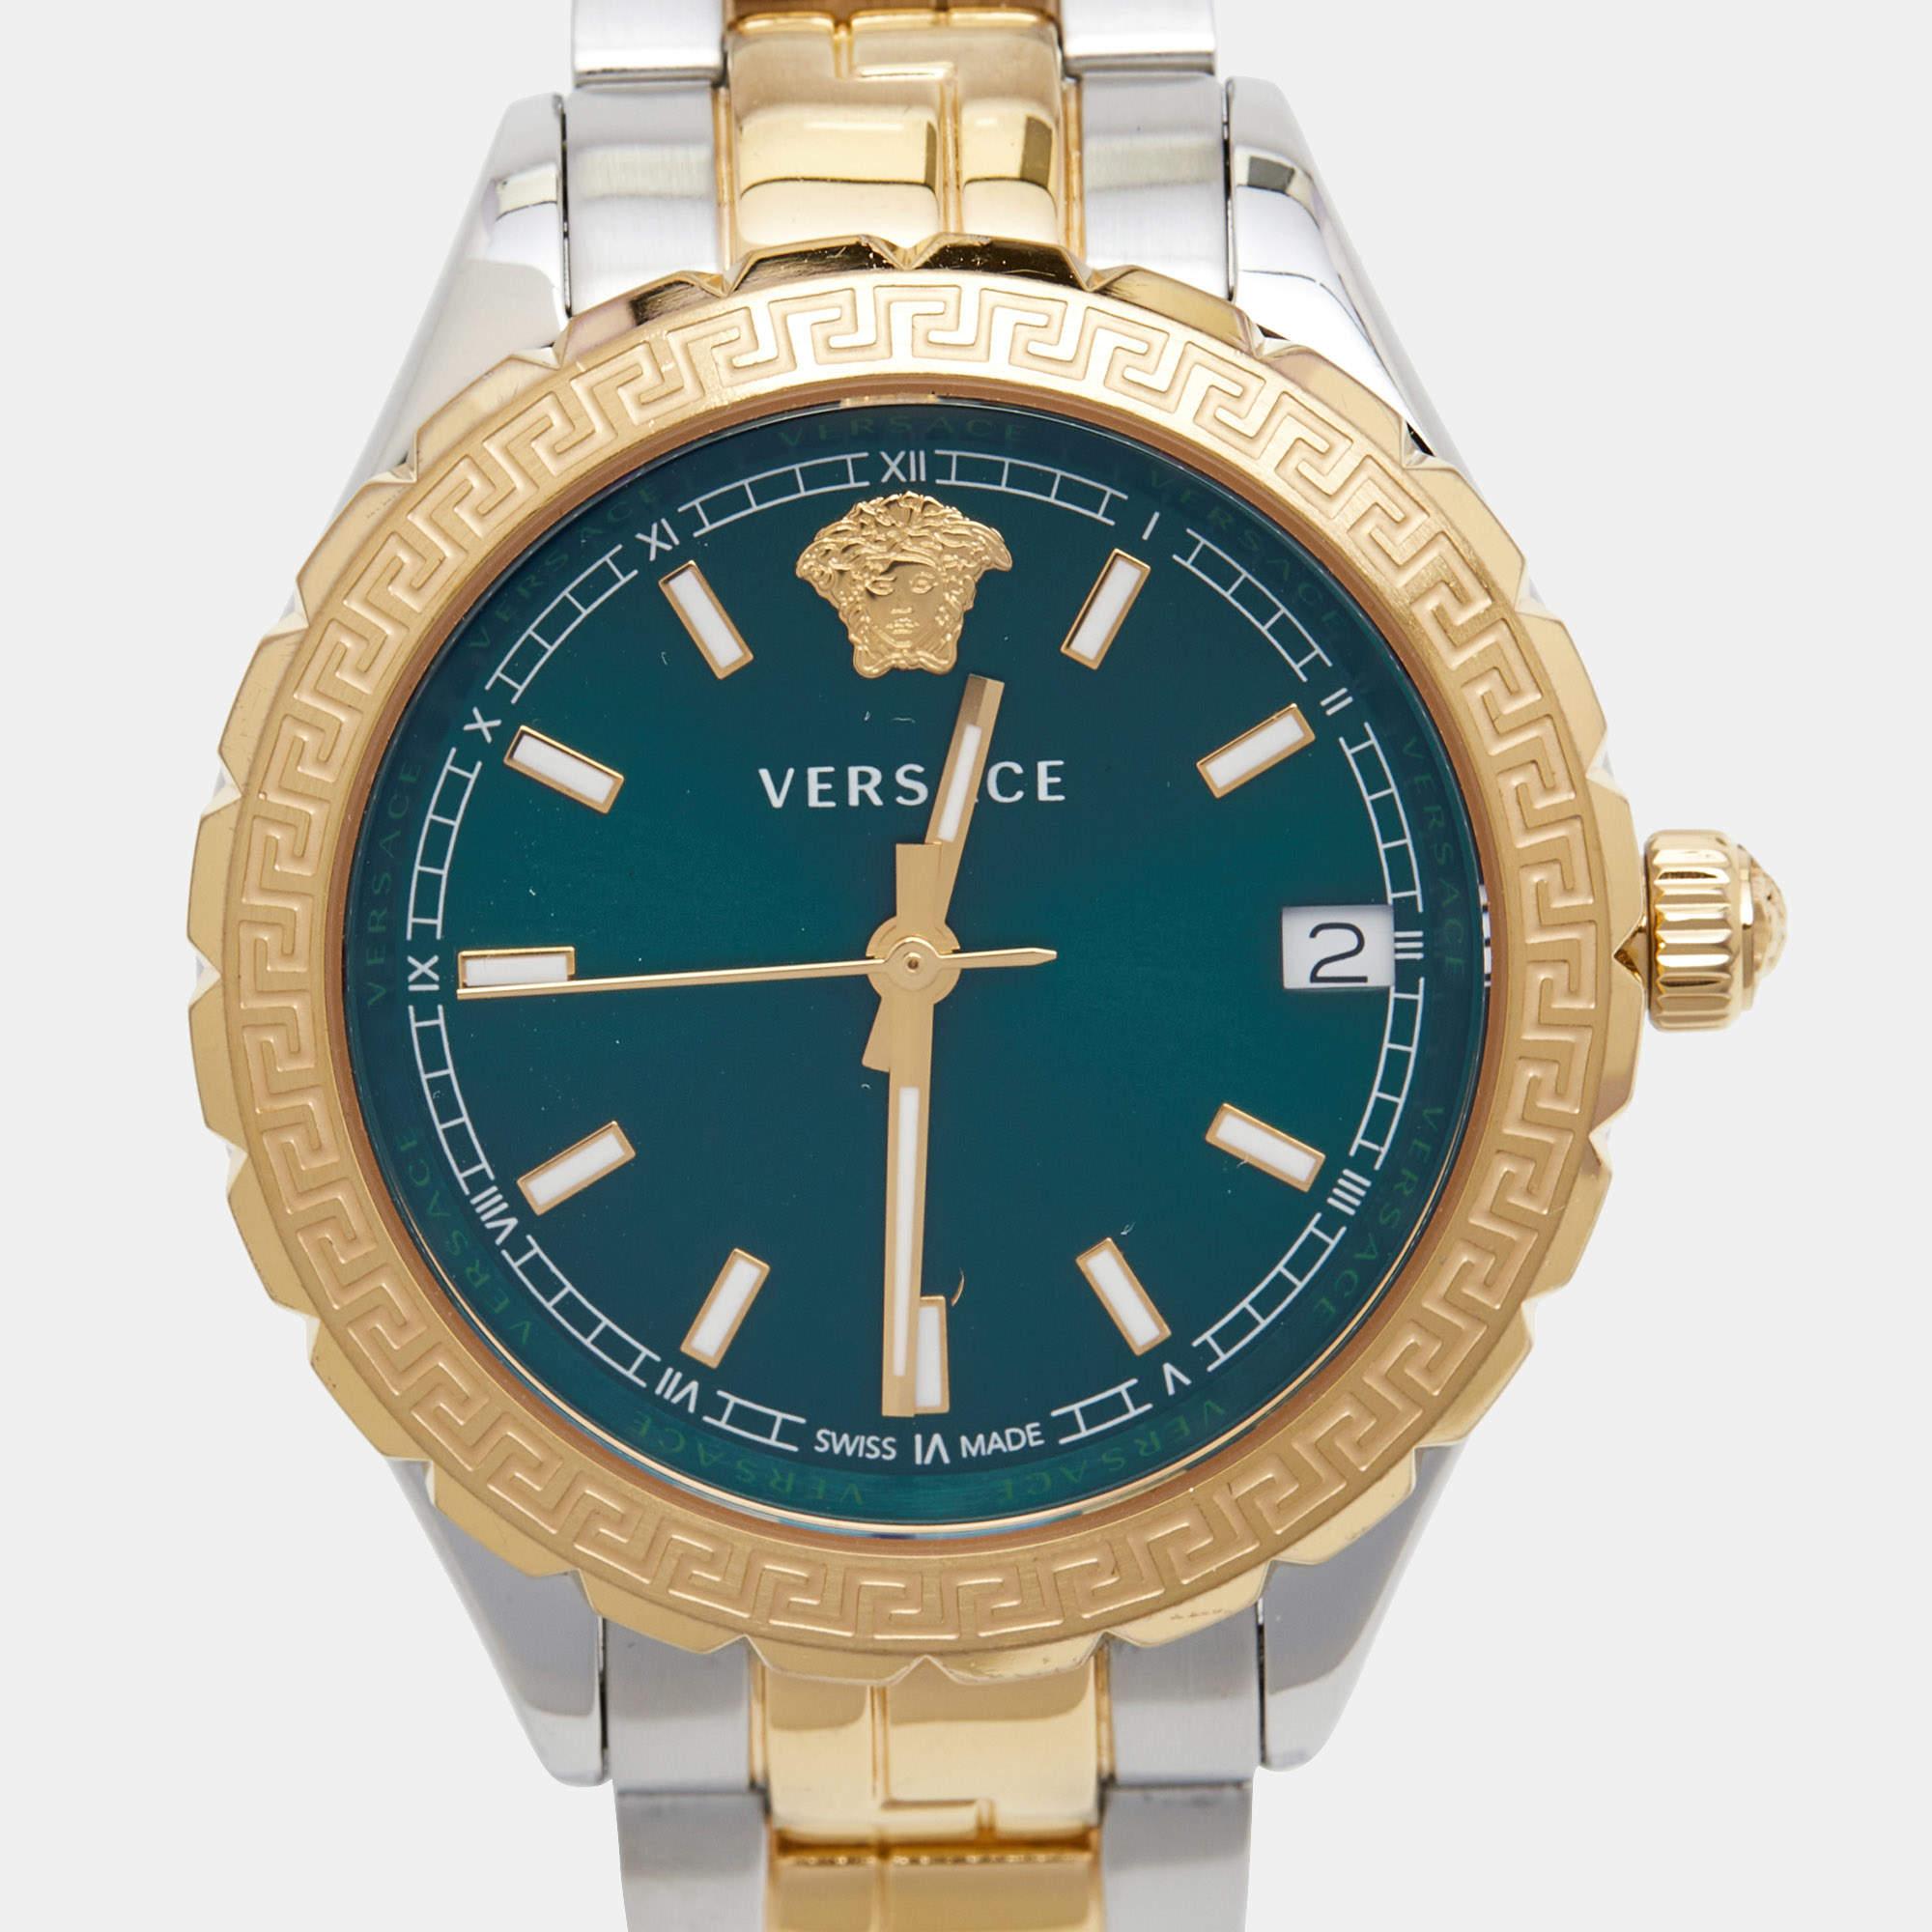 The Versace Hellenyium V12050016 Women's Wristwatch exudes elegance and sophistication. Its striking design combines a vibrant green hue on the dial with luxurious stainless steel in dual tones, creating a captivating aesthetic. With precise quartz